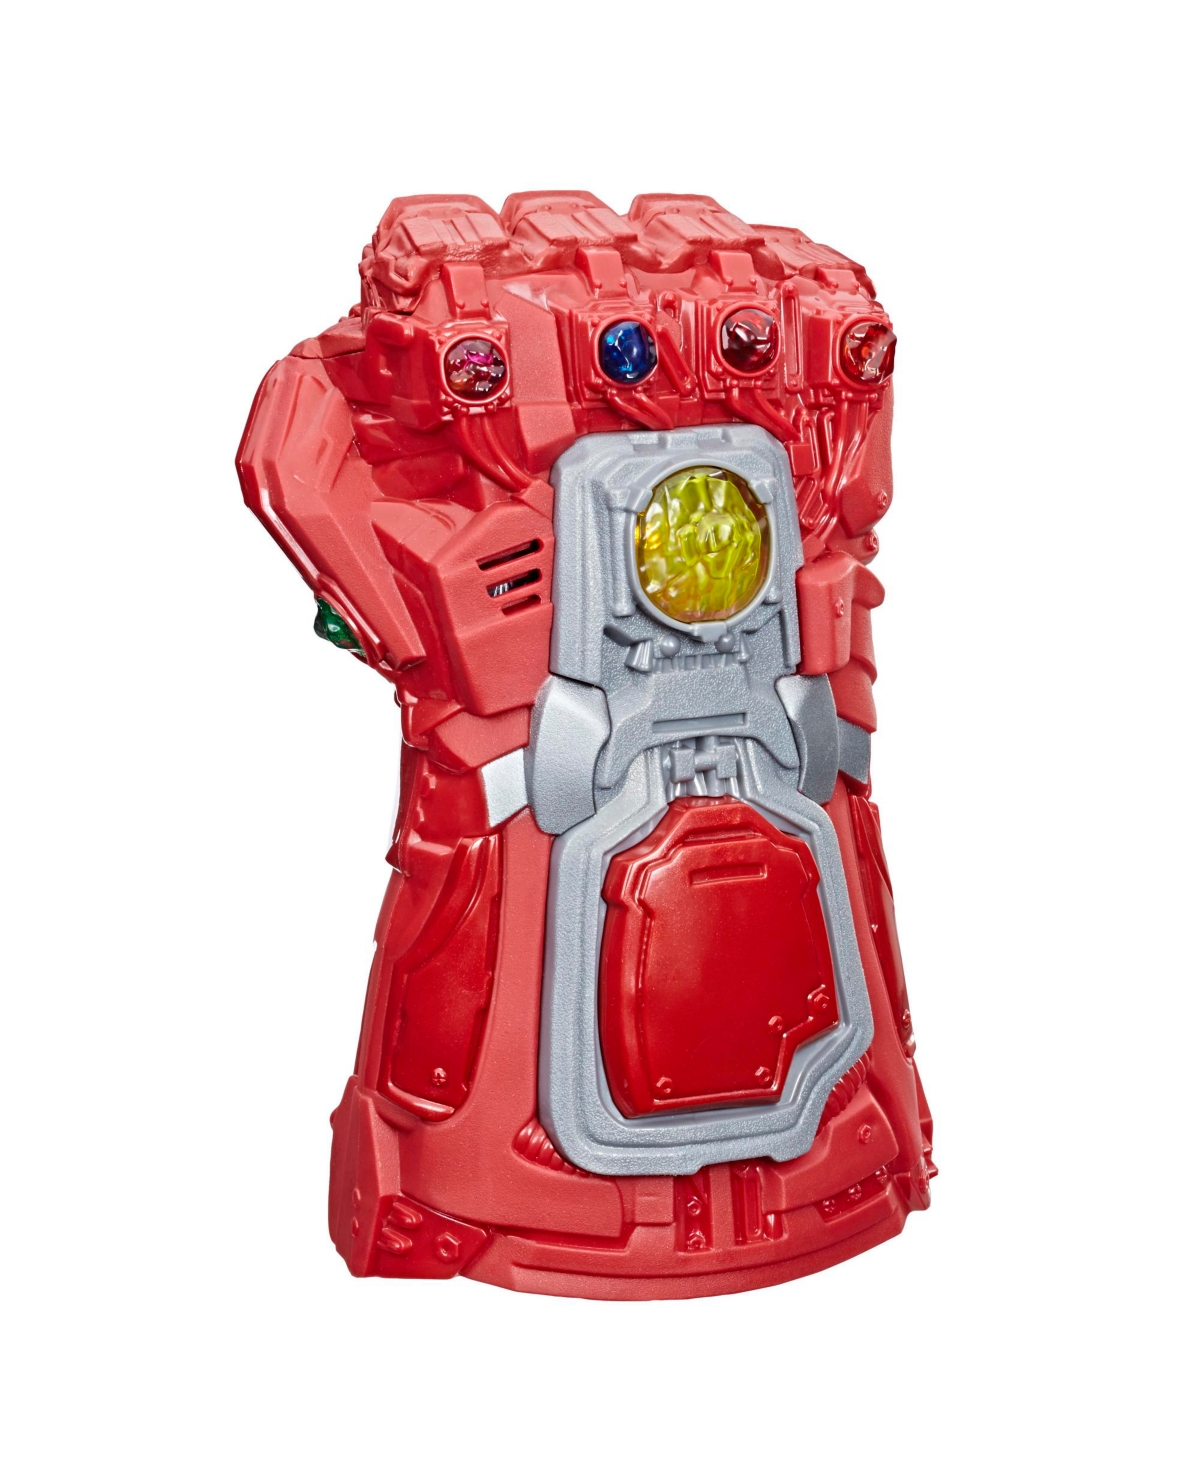 Marvel Kids' Avengers: Endgame Red Infinity Gauntlet Electronic Fist Roleplay